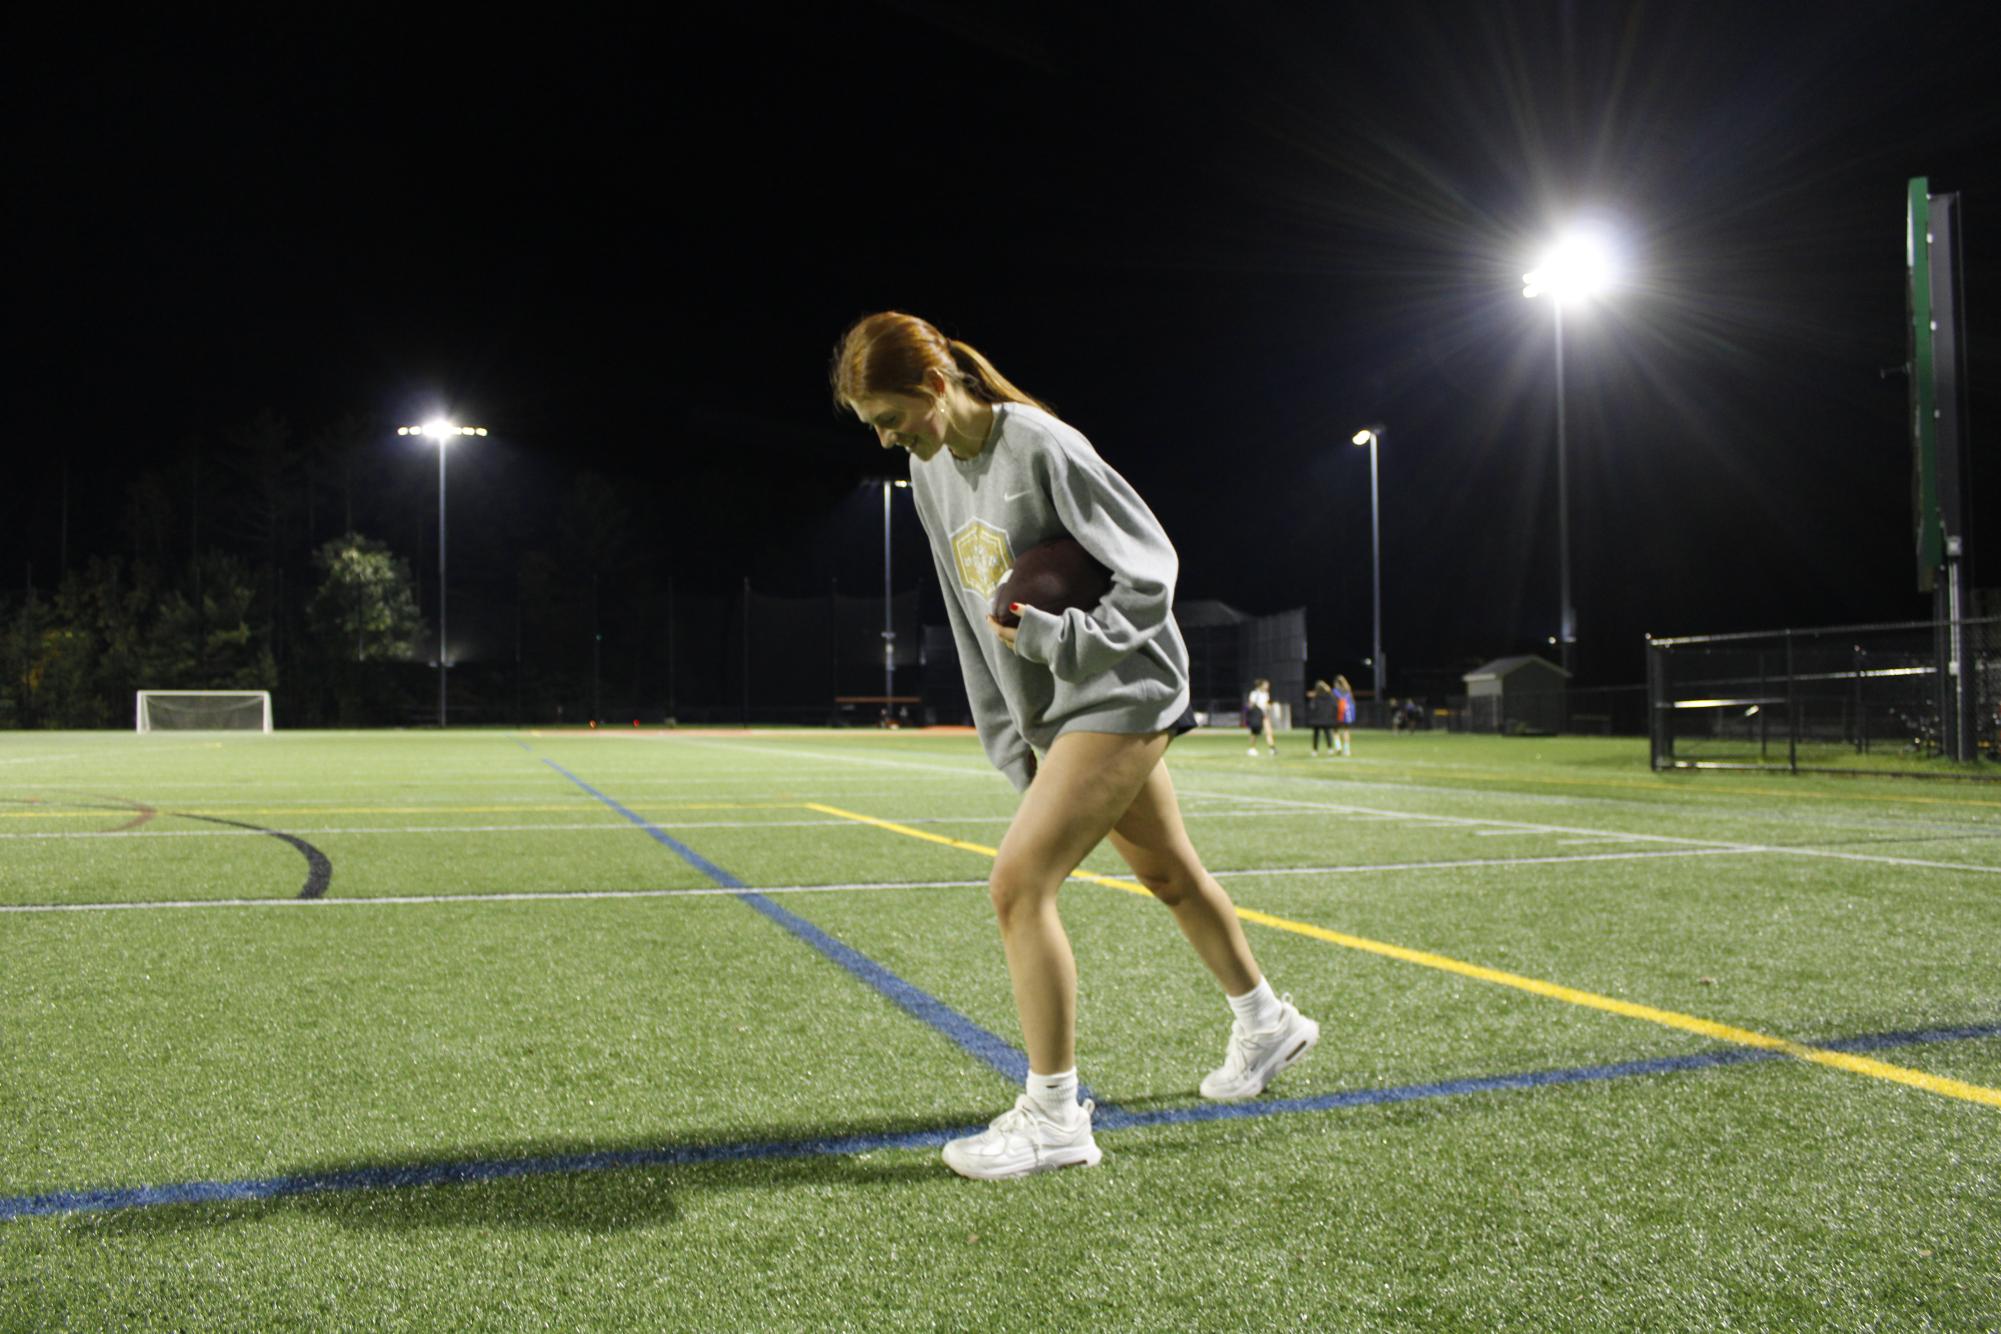 Senior wide receiver Johanna DuPont runs plays under the lights in preparation for the game.